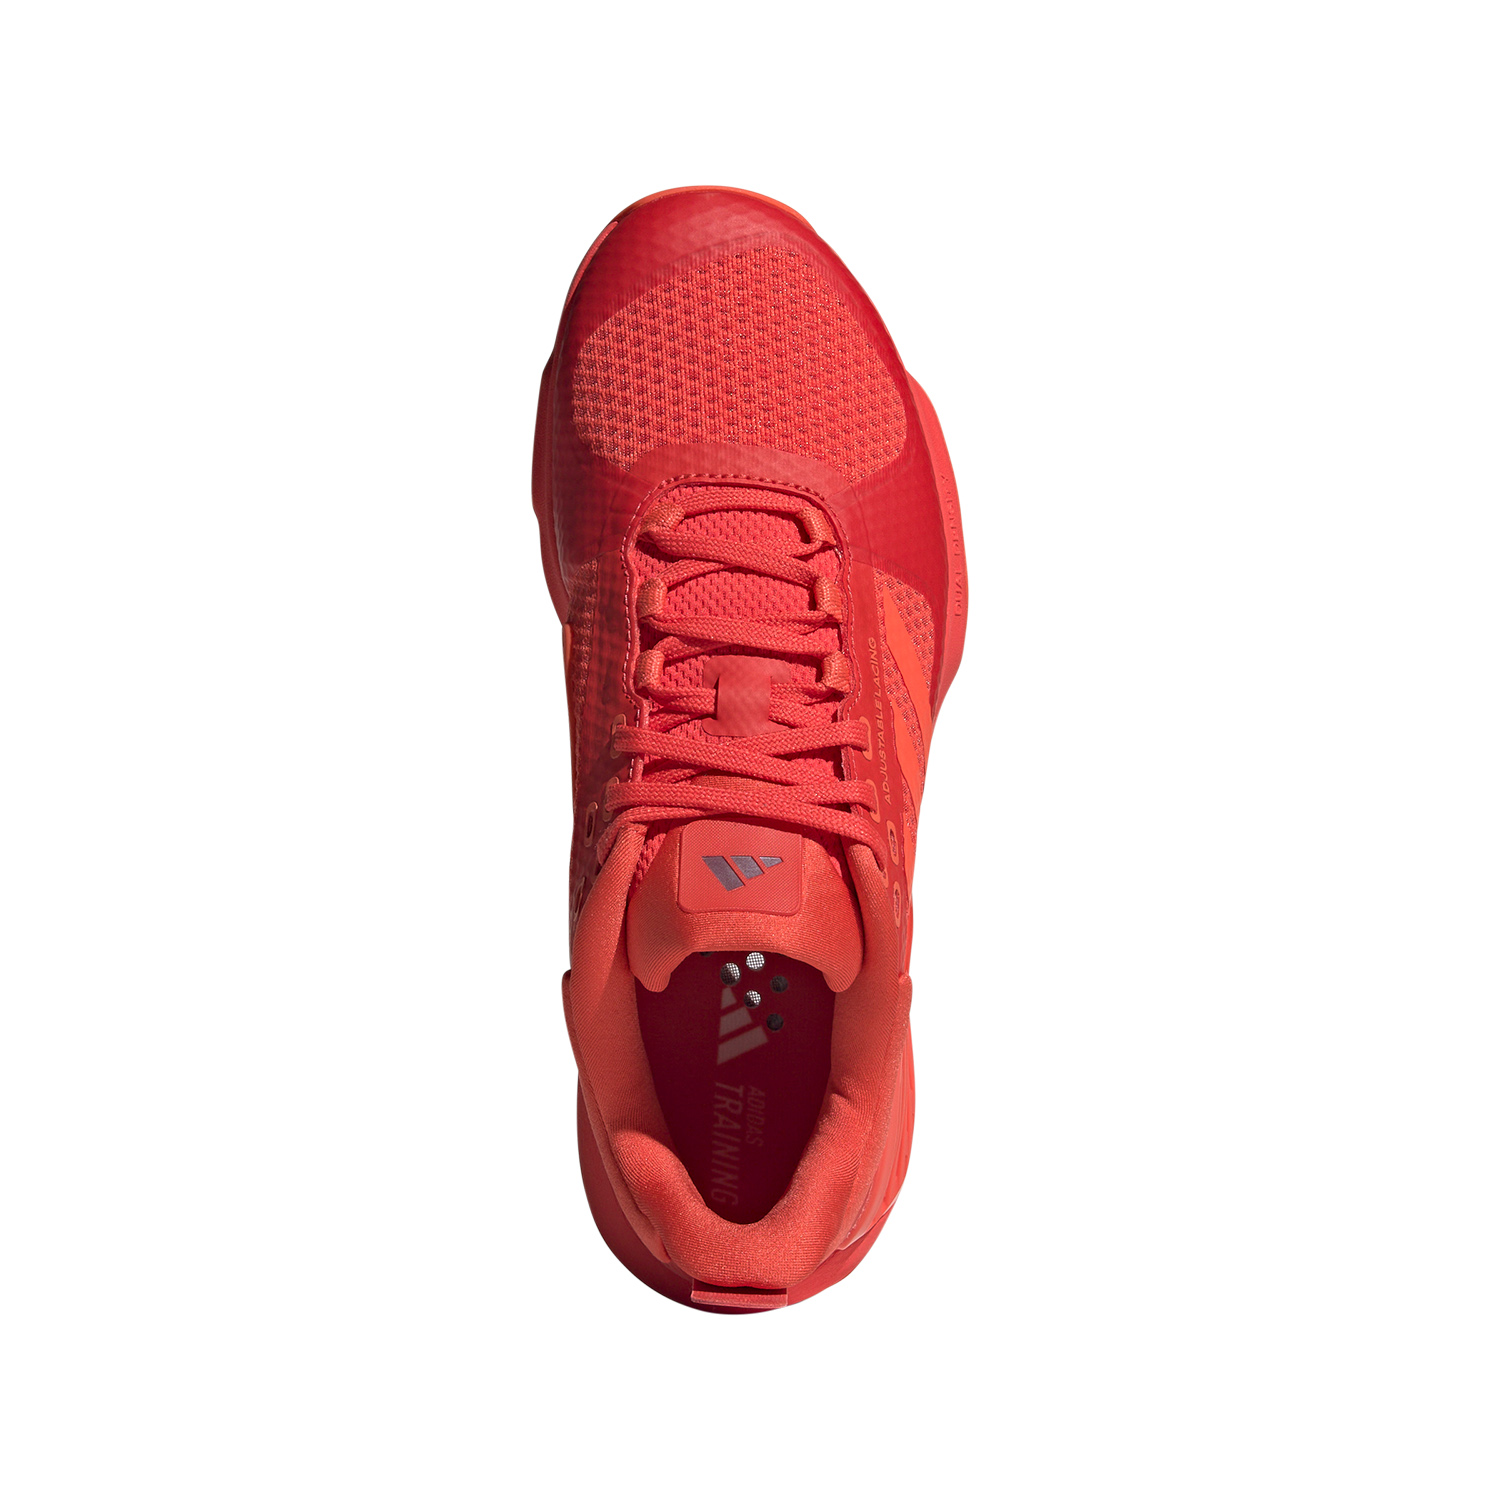 adidas Dropset 2 Trainer - Bright Red/Solar Red/Shadow Red